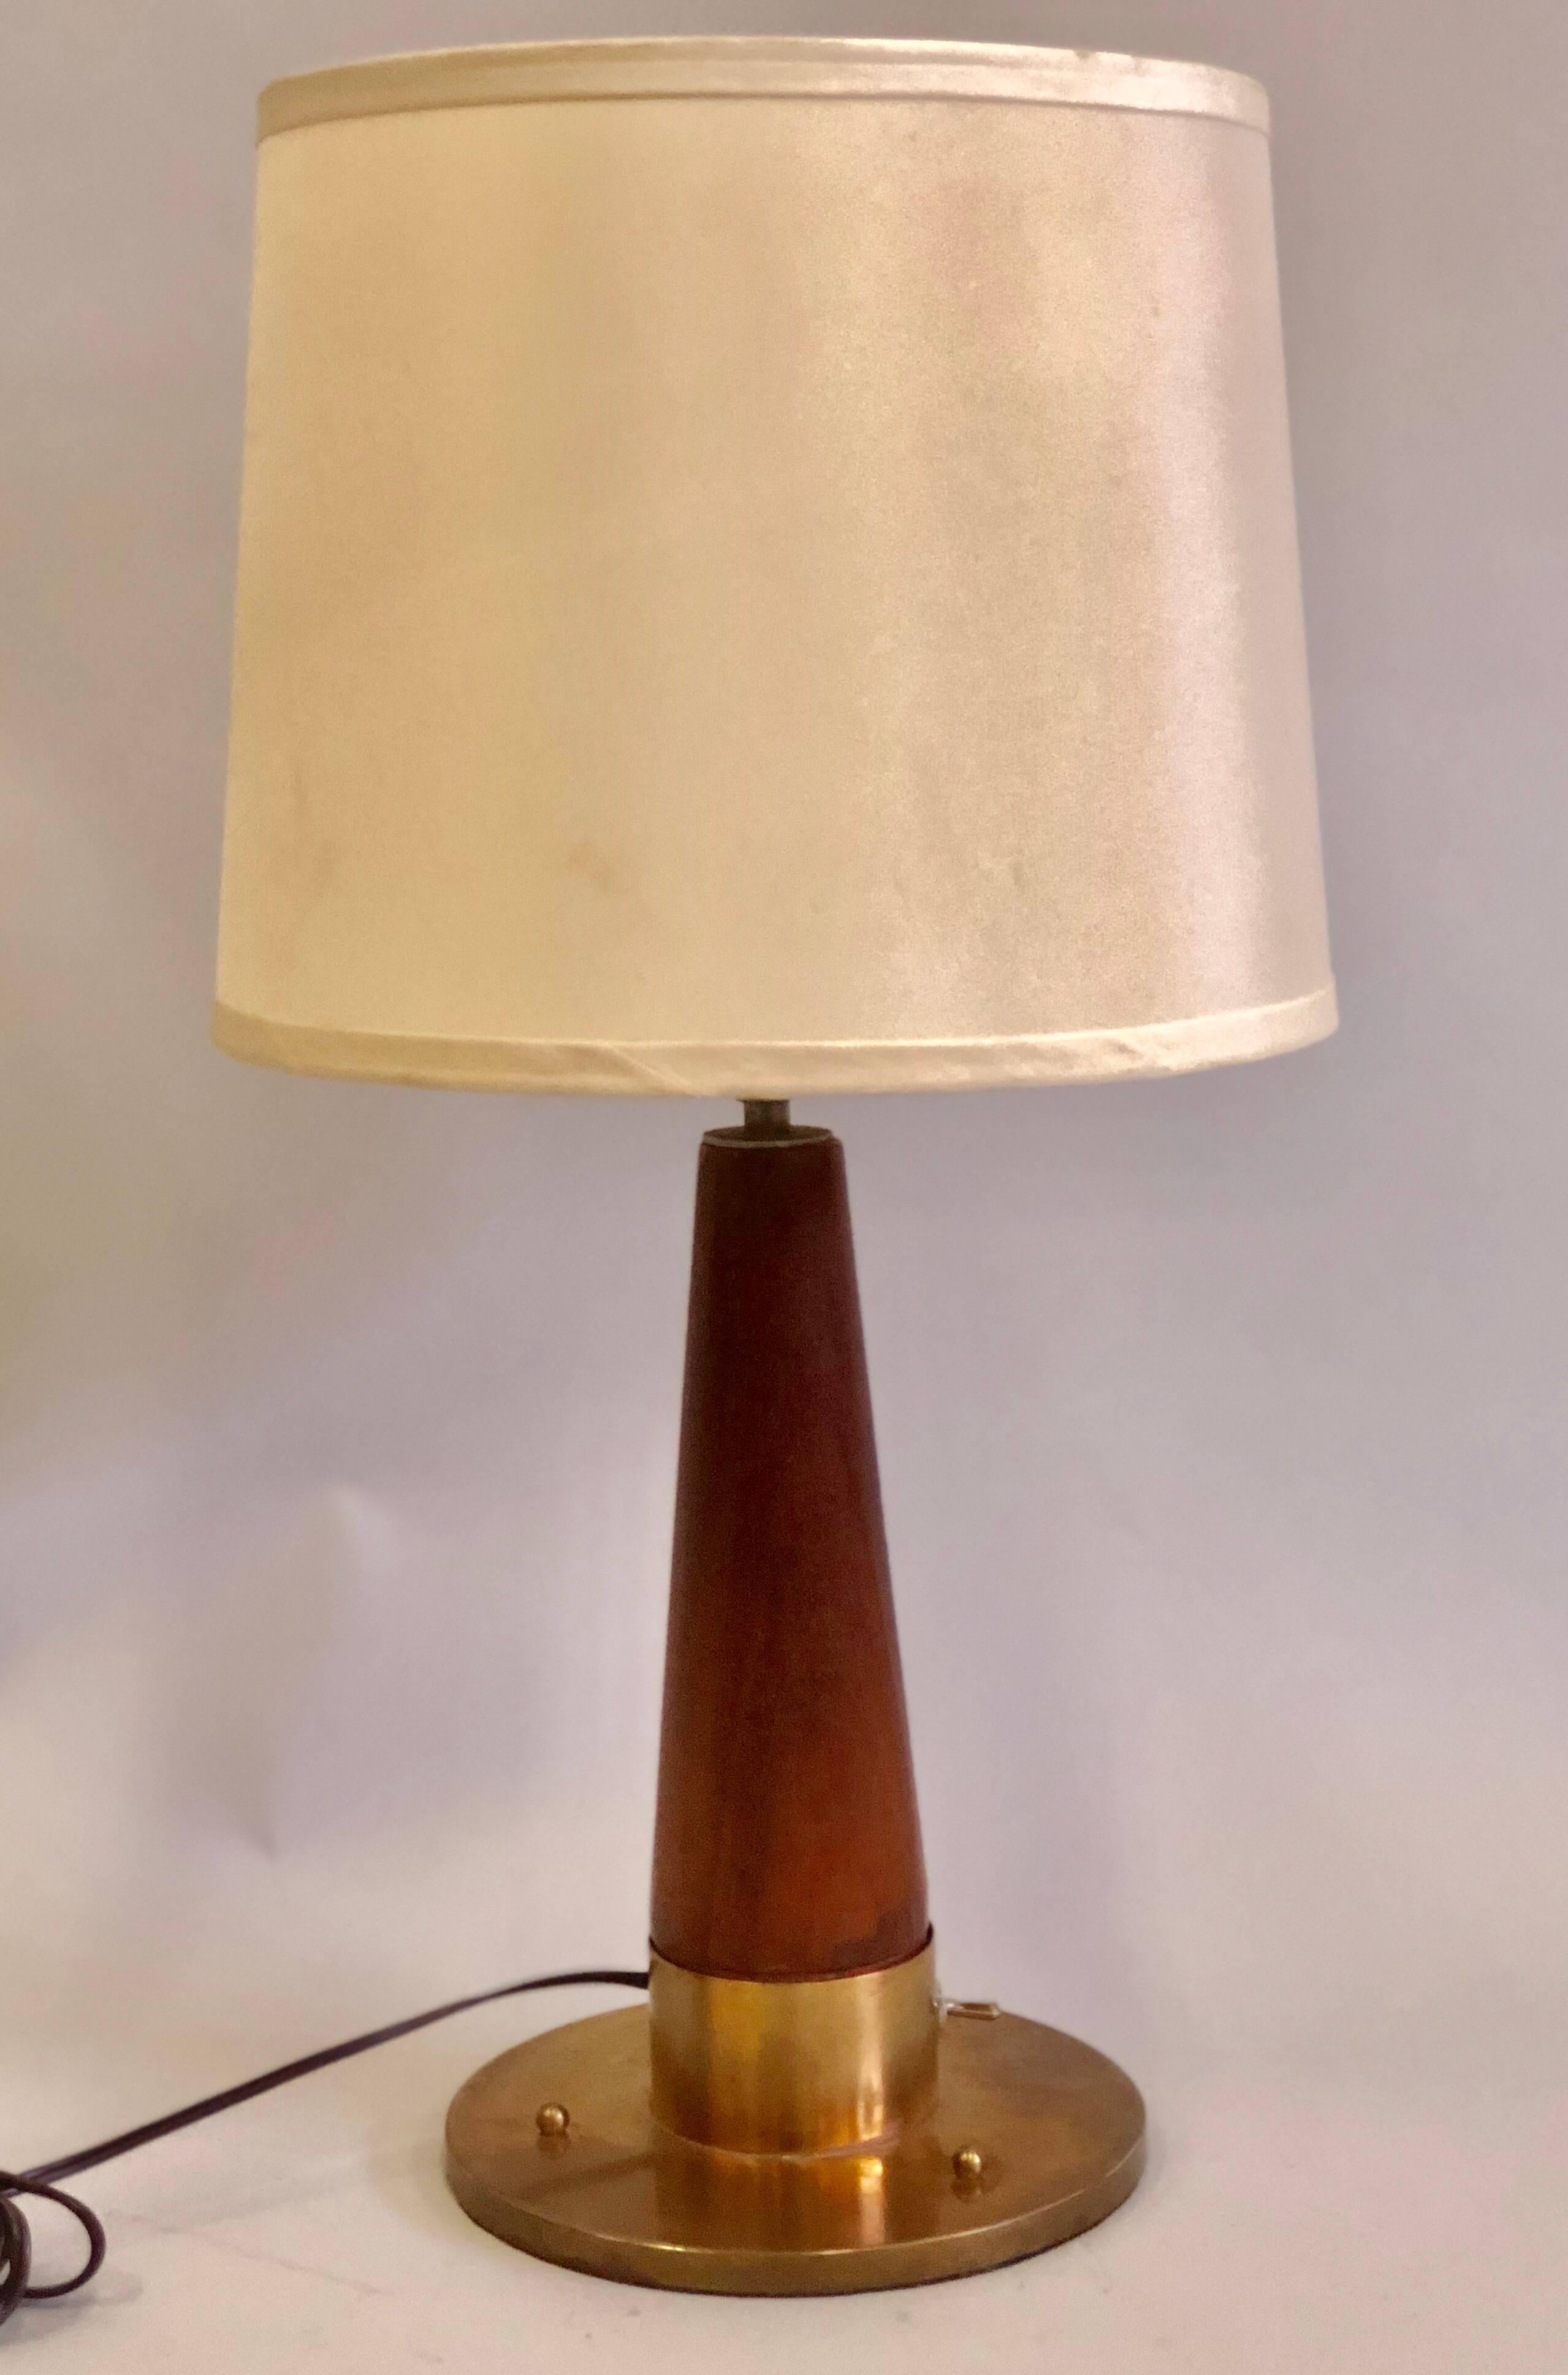 Elegant British midcentury teak and brass desk or table lamp from a luxury marine vessel featuring an elegant round brass base and a tapered teak stem finished with brass banding around the lower and upper parts of the teak stem. Brass ball finials